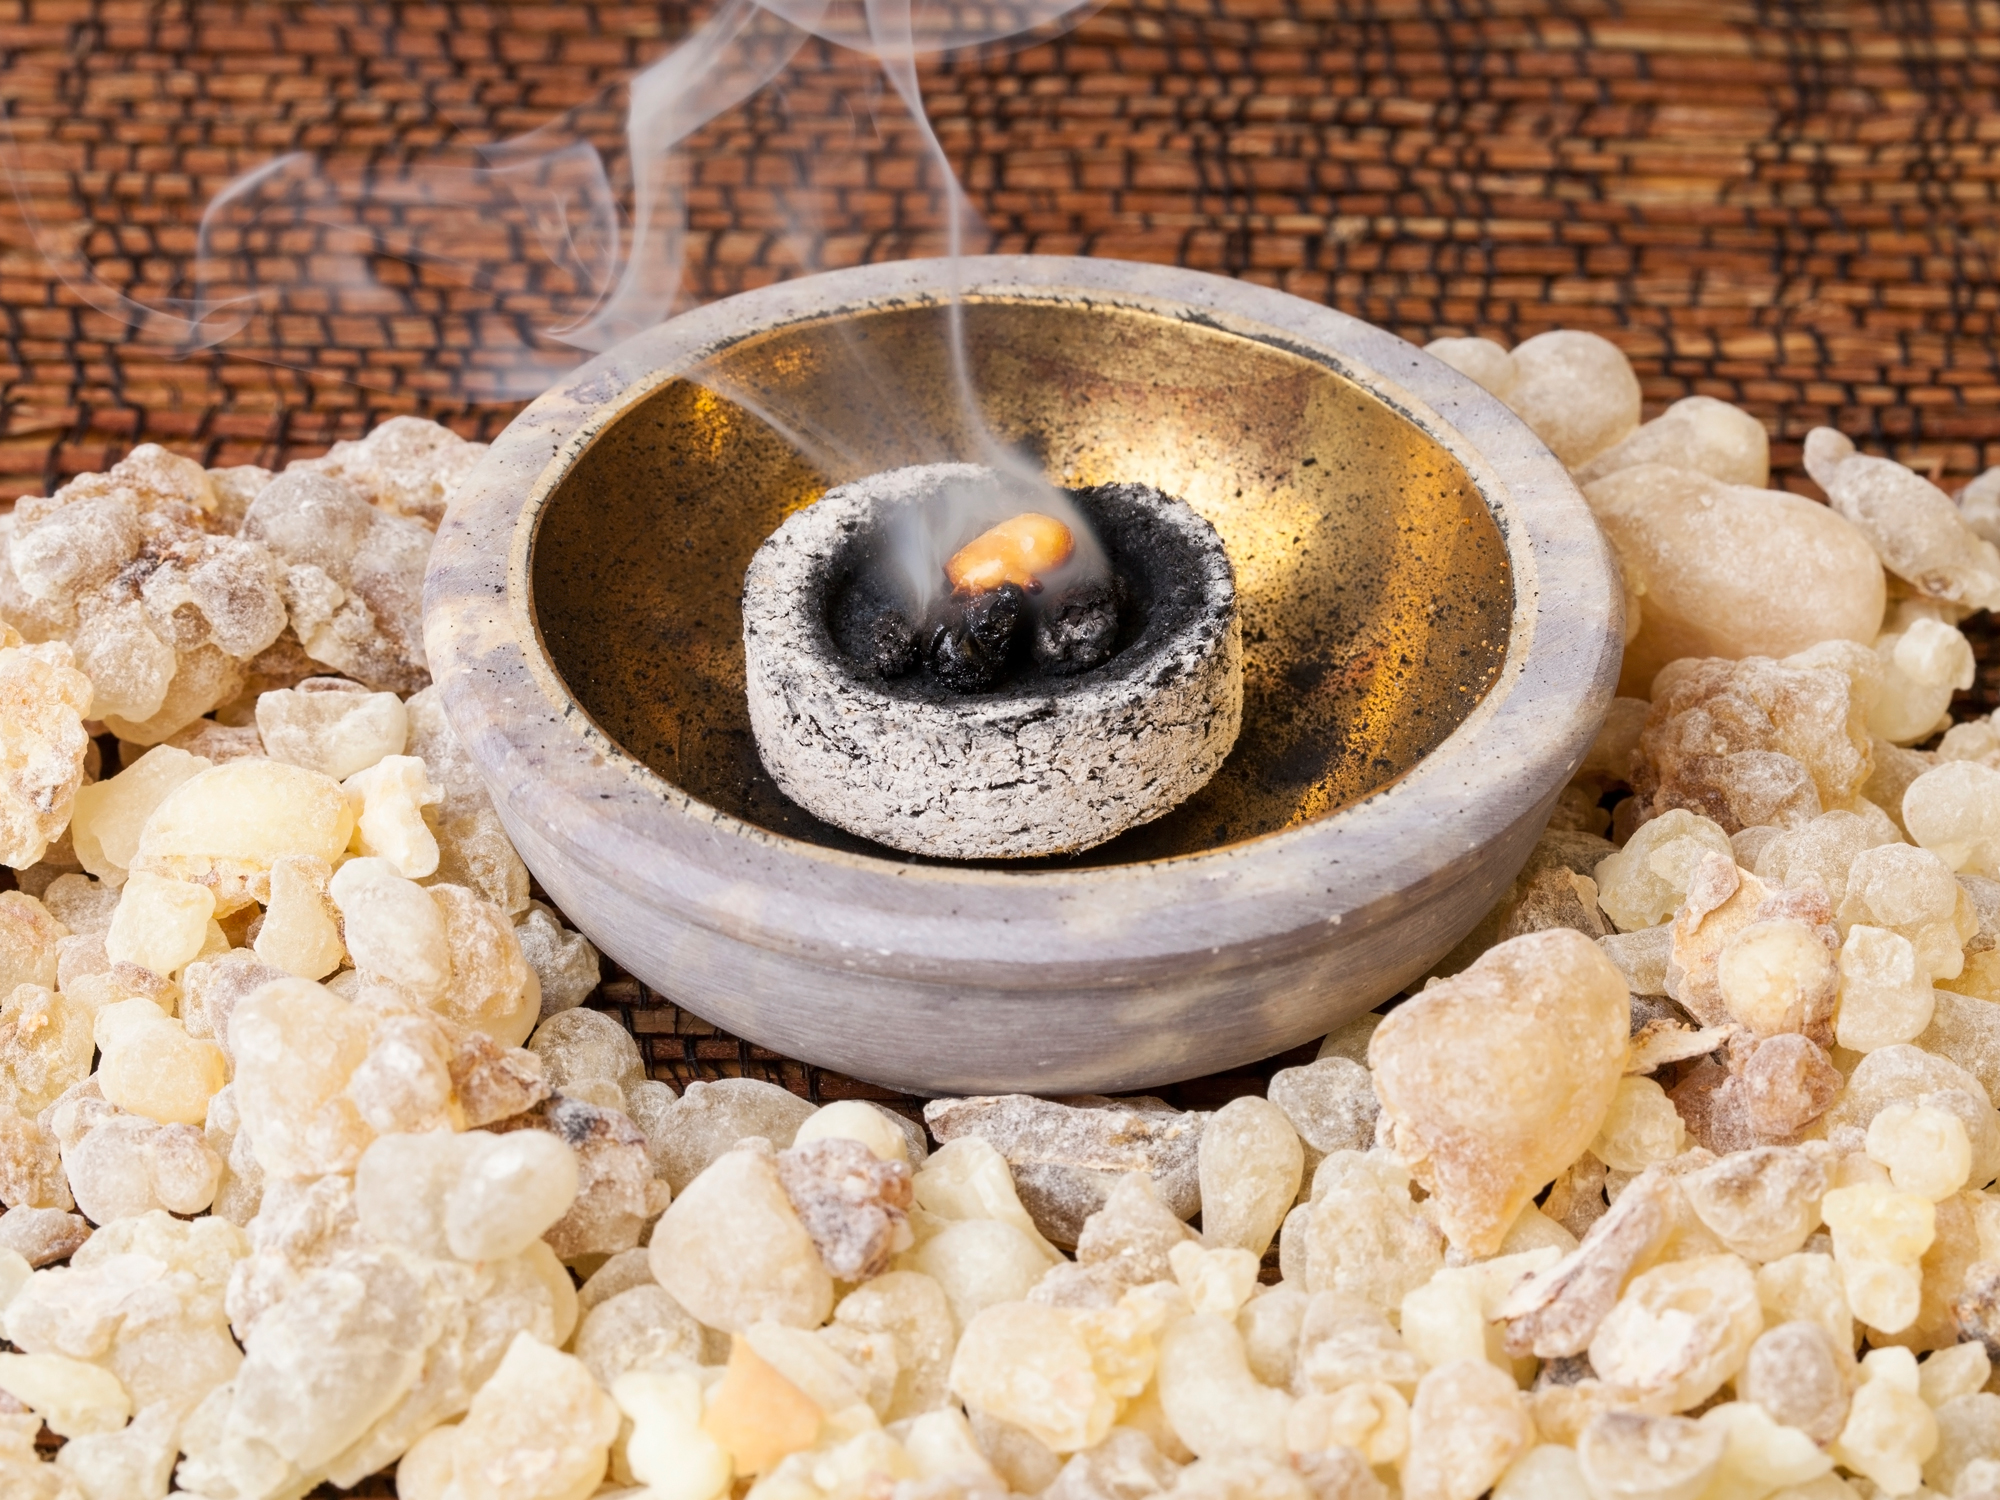 Frankincense: The biblical cancer cure?